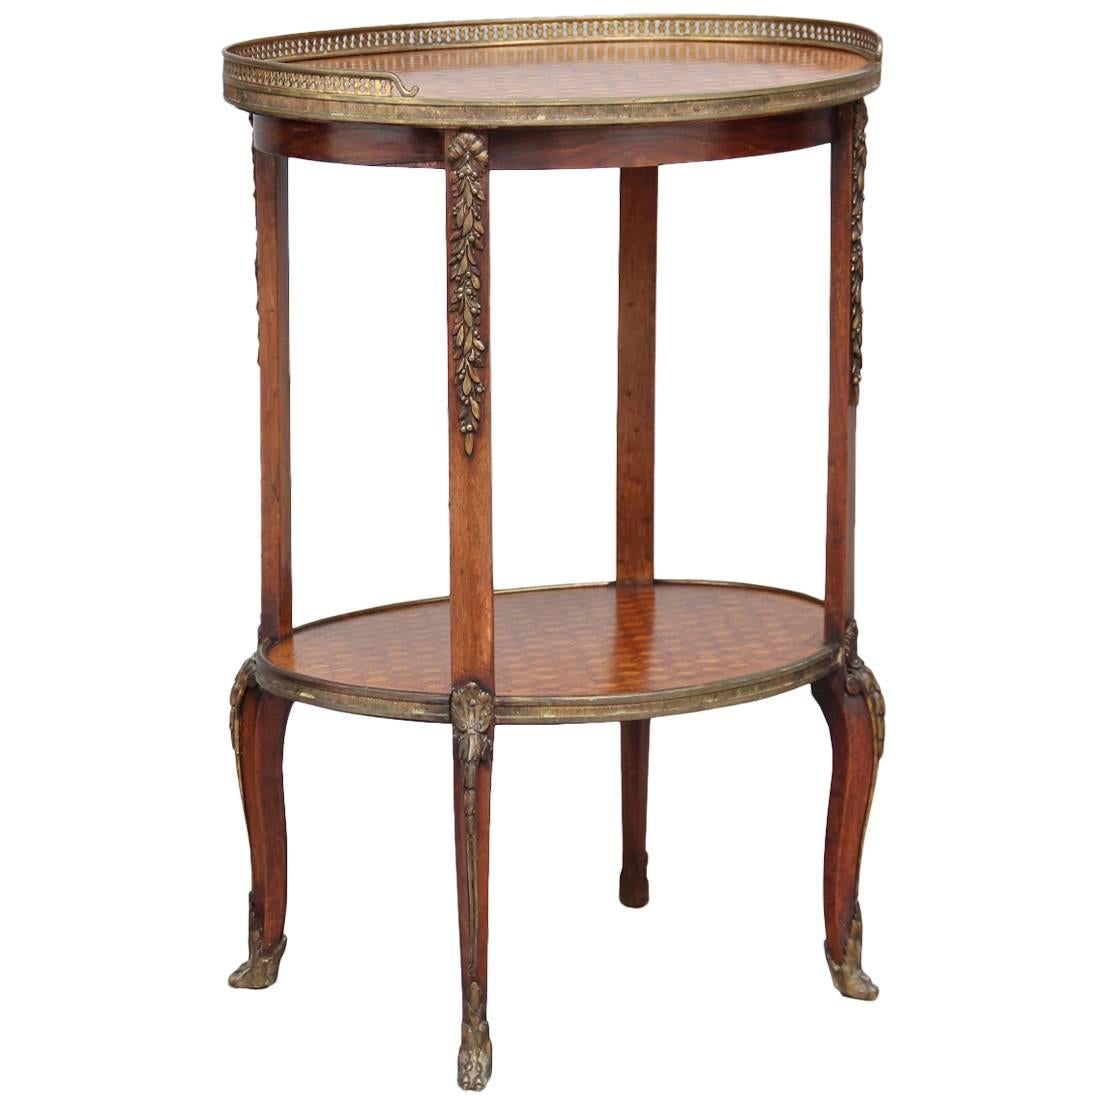 19th Century French Kingwood Parquetry Etagere